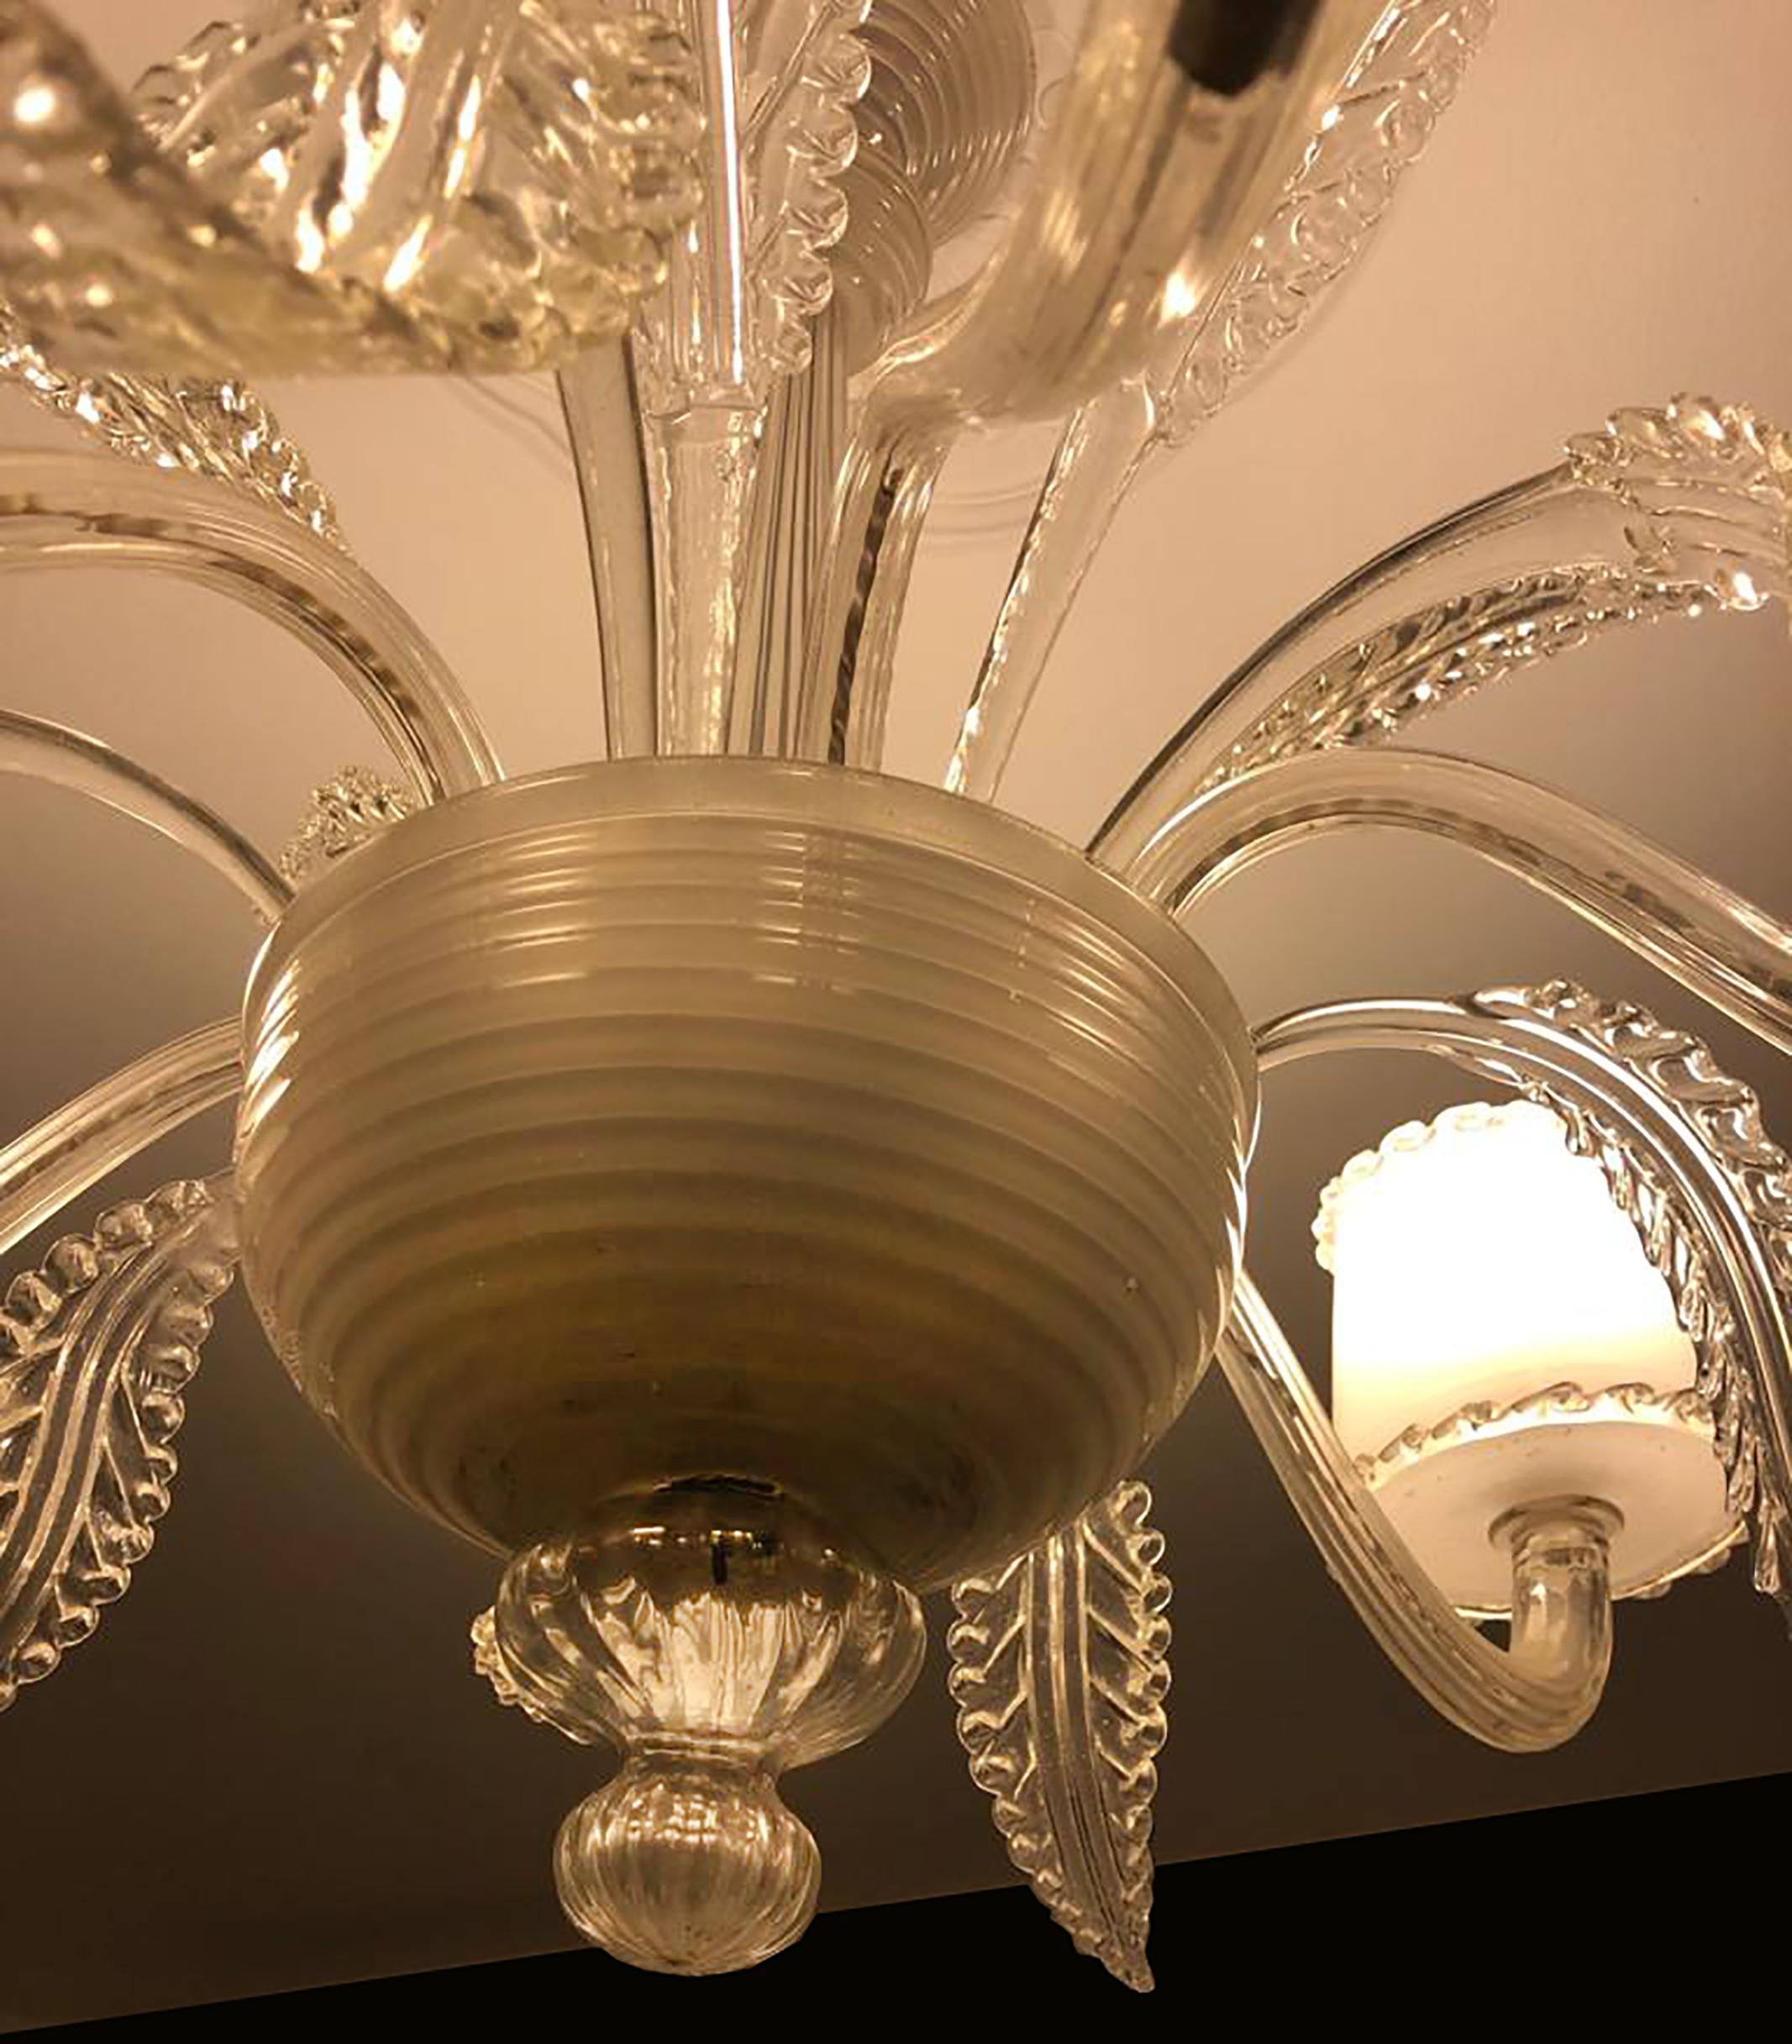 Mid-20th Century Italian Chandelier by Barovier & Toso, Murano, 1940s For Sale 2